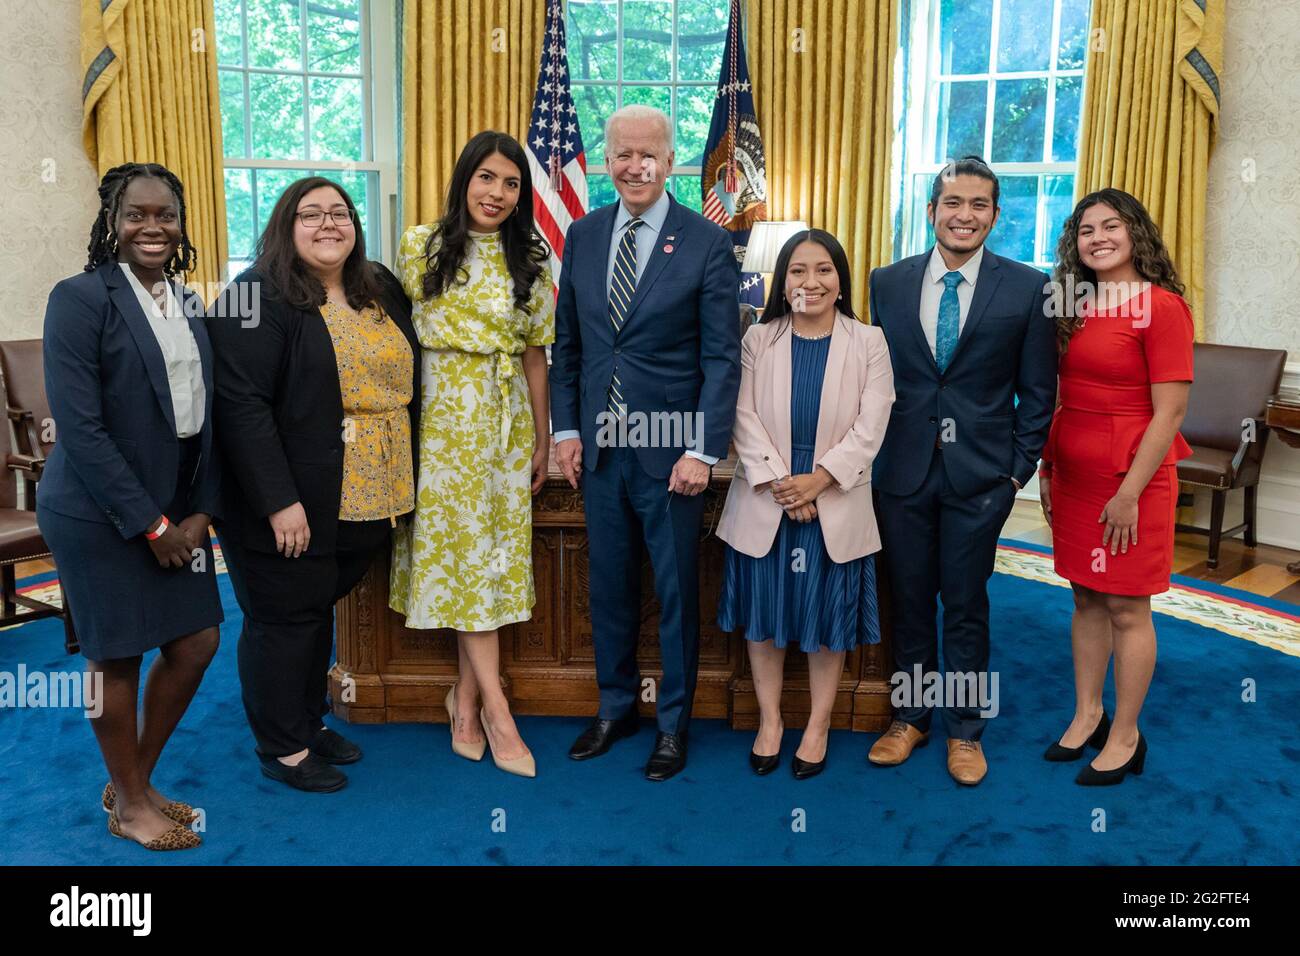 President Joe Biden poses for a photo during a meeting with DACA (Deferred Action for Childhood Arrivals) recipients to discuss the American Dream and Promise Act on Friday, May 14, 2021, in the Oval Office of the White House. (Official White House Adam Schultz via Sipa USA) Please note: Fees charged by the agency are for the agency’s services only, and do not, nor are they intended to, convey to the user any ownership of Copyright or License in the material. The agency does not claim any ownership including but not limited to Copyright or License in the attached material. By publishing this m Stock Photo